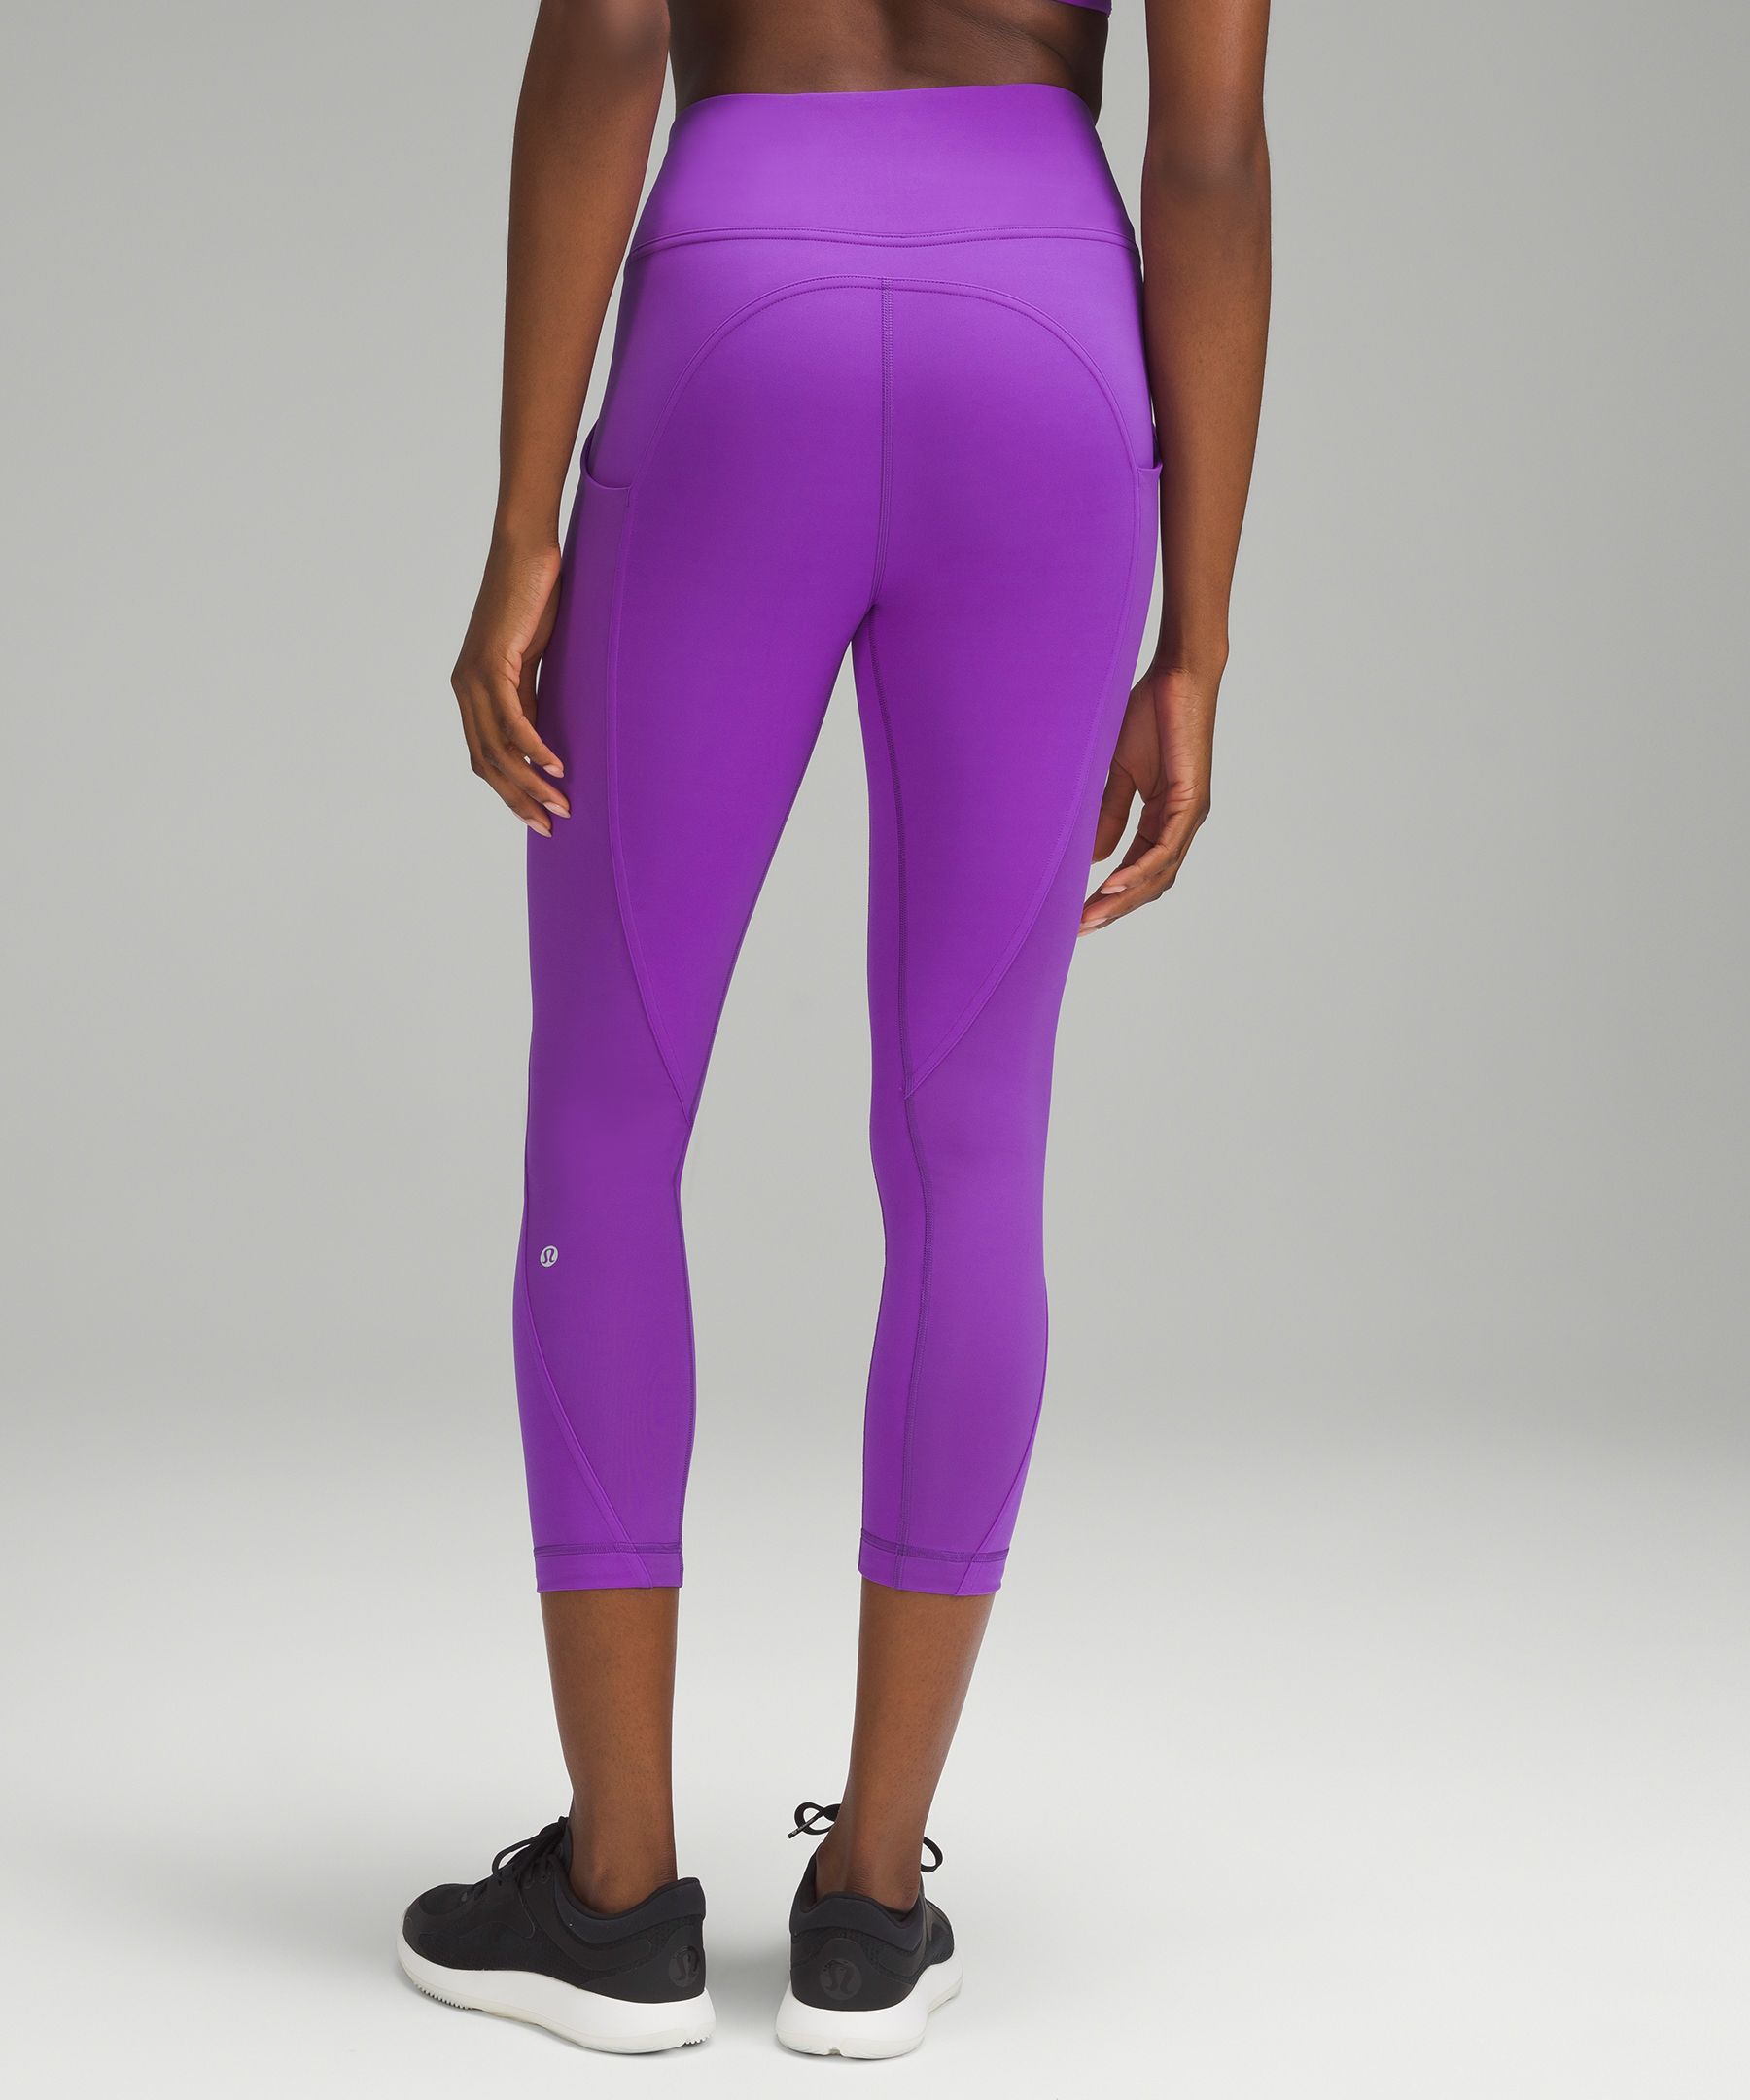 Are Lululemon Leggings See-Through? Let's Uncover the Truth - Playbite